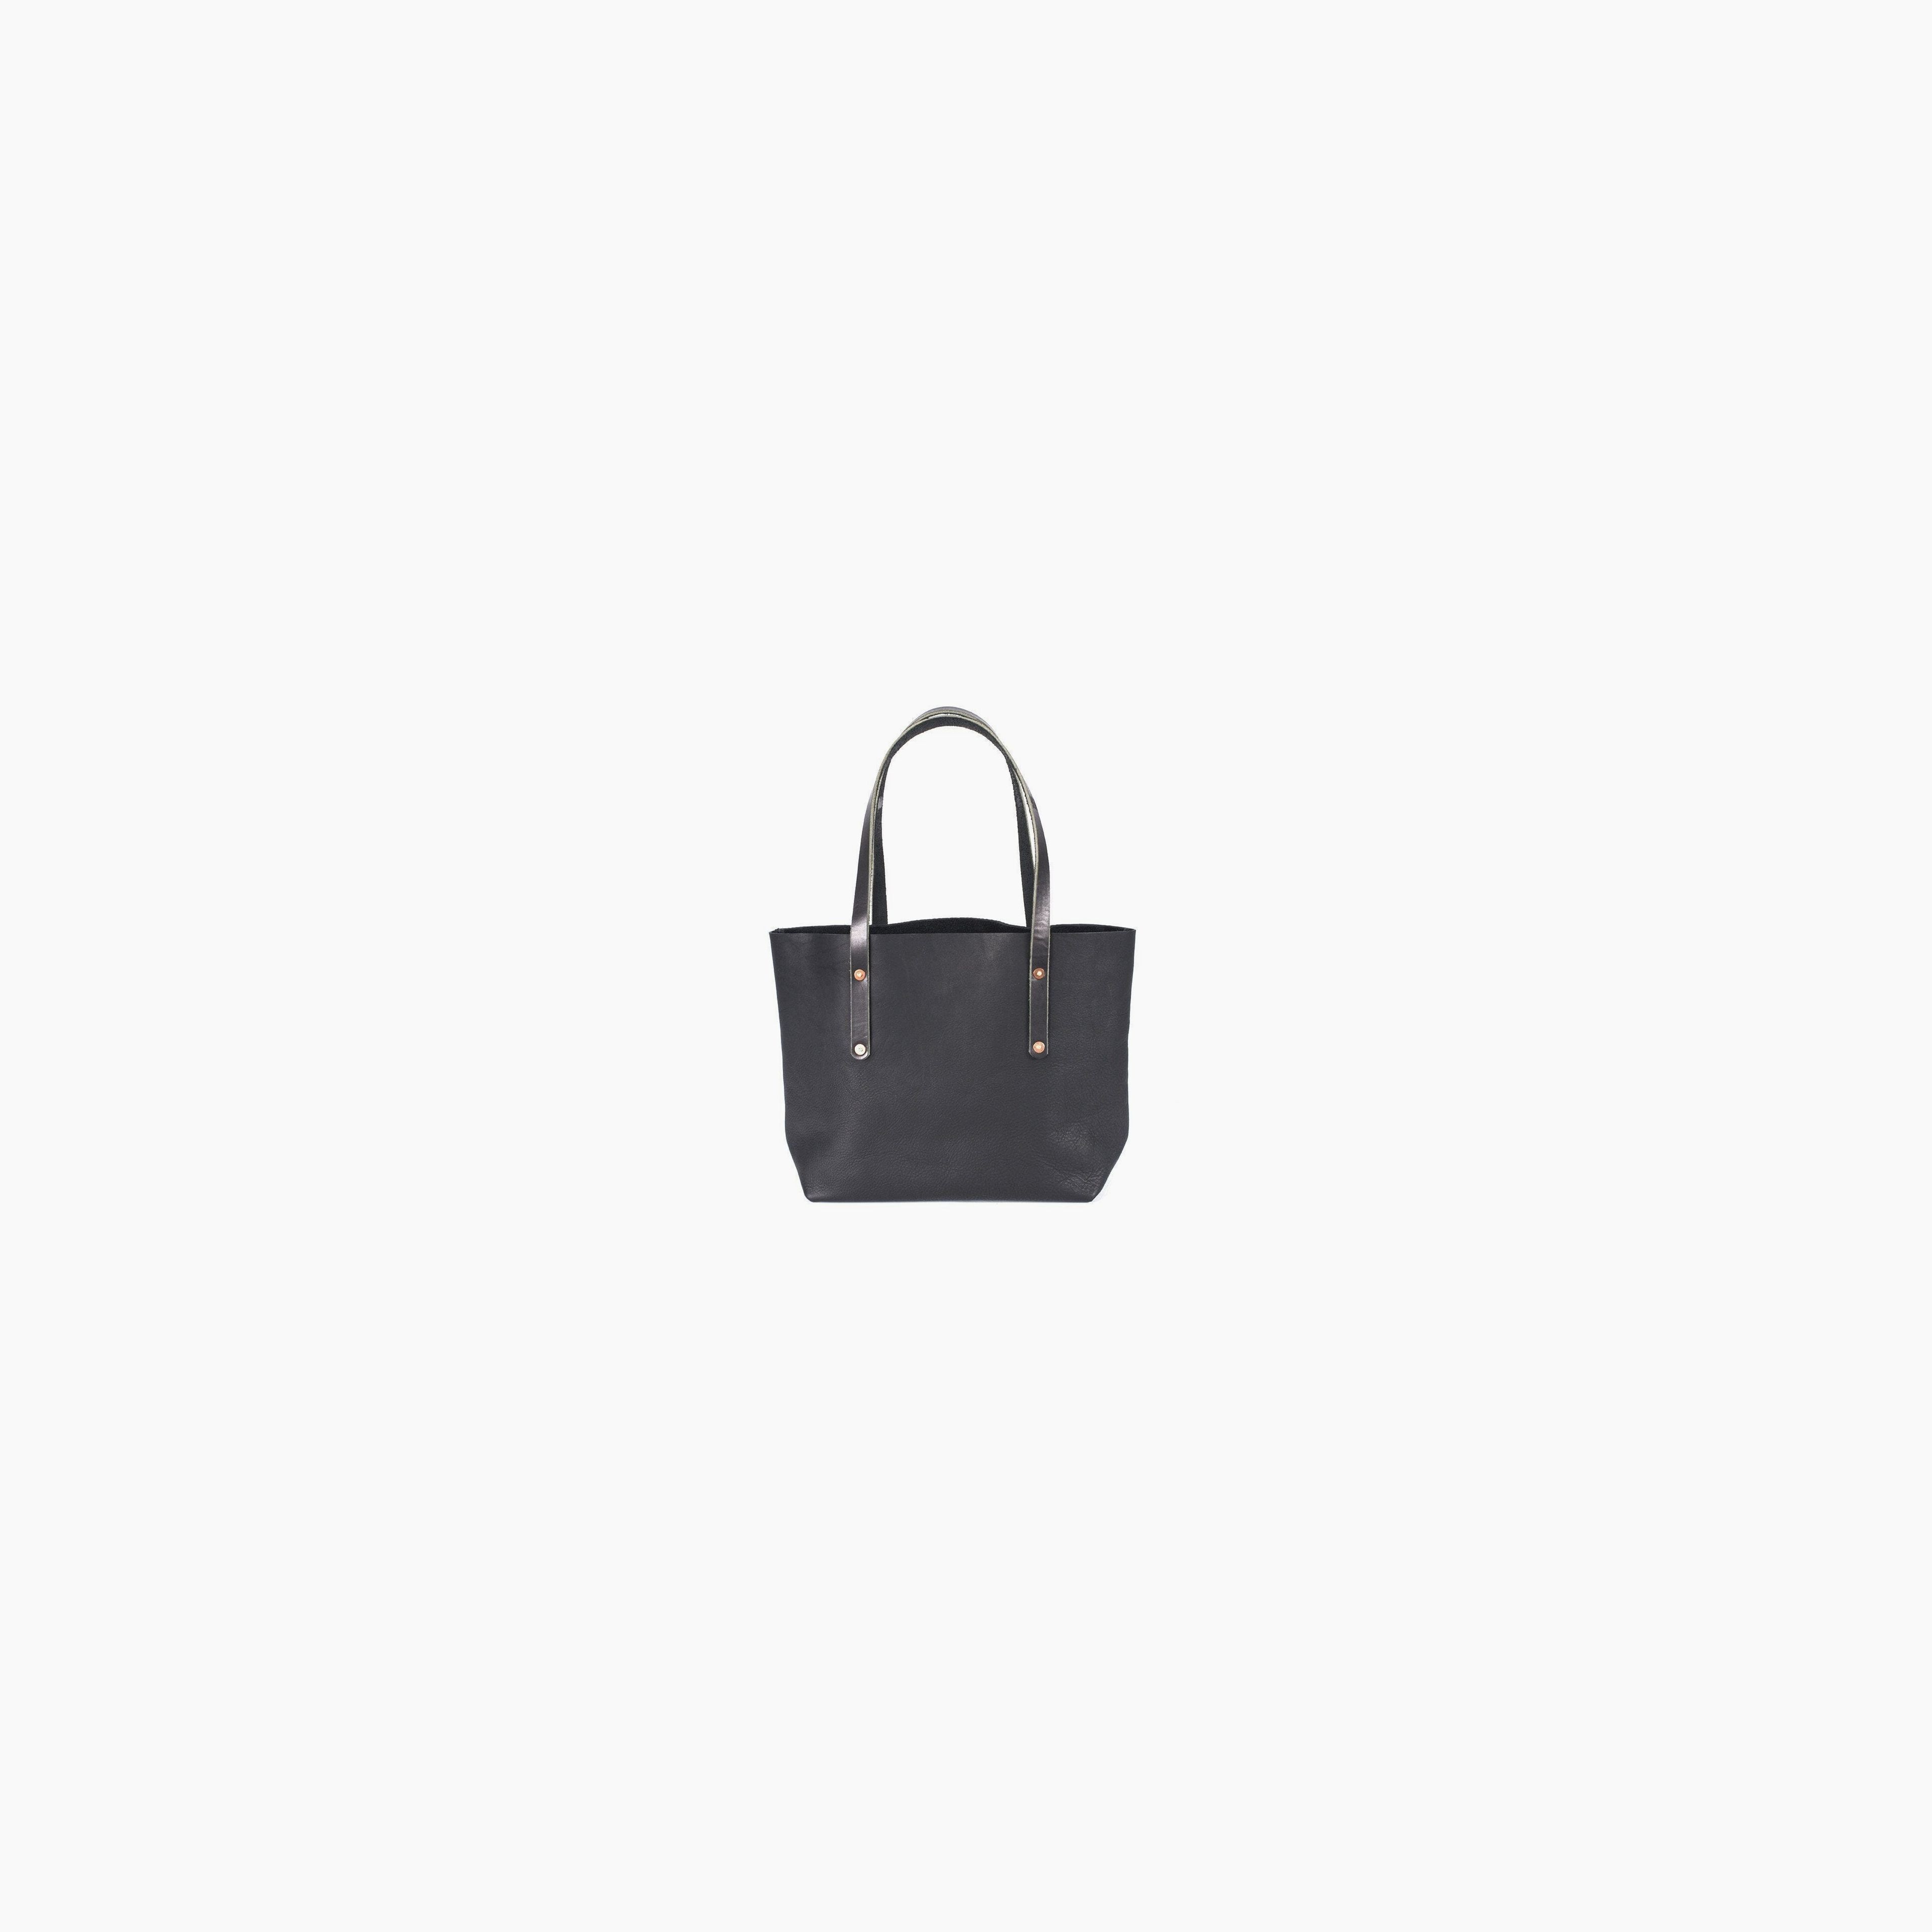 Avery Leather Tote Bag - Large - Black